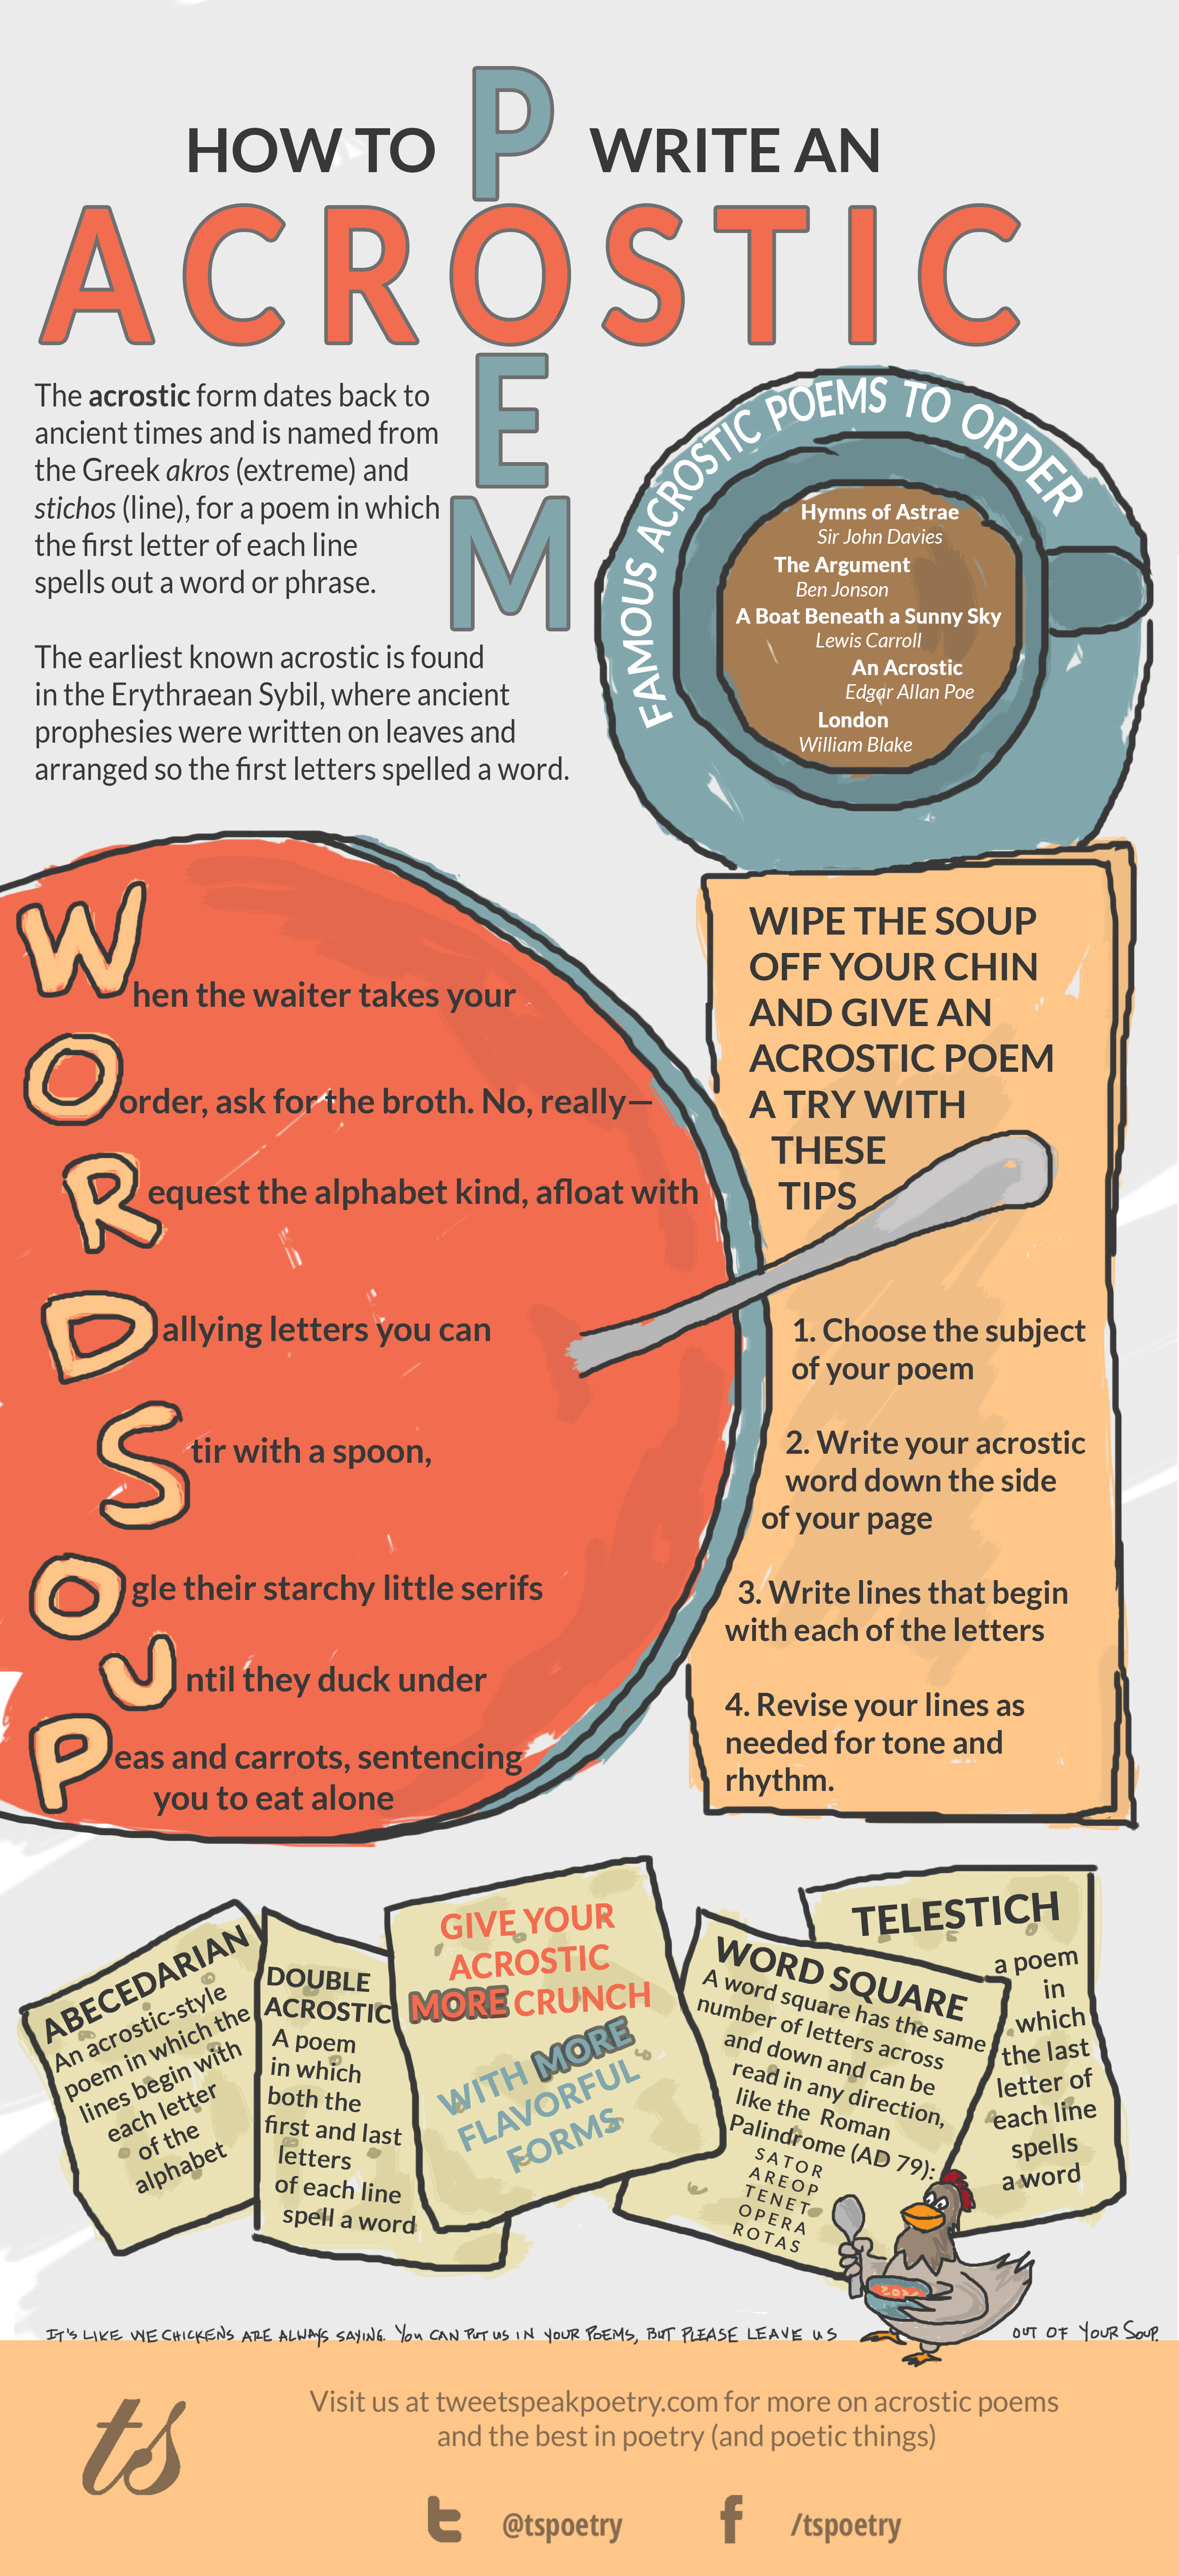 how-to-write-an-acrostic-poem-infographic